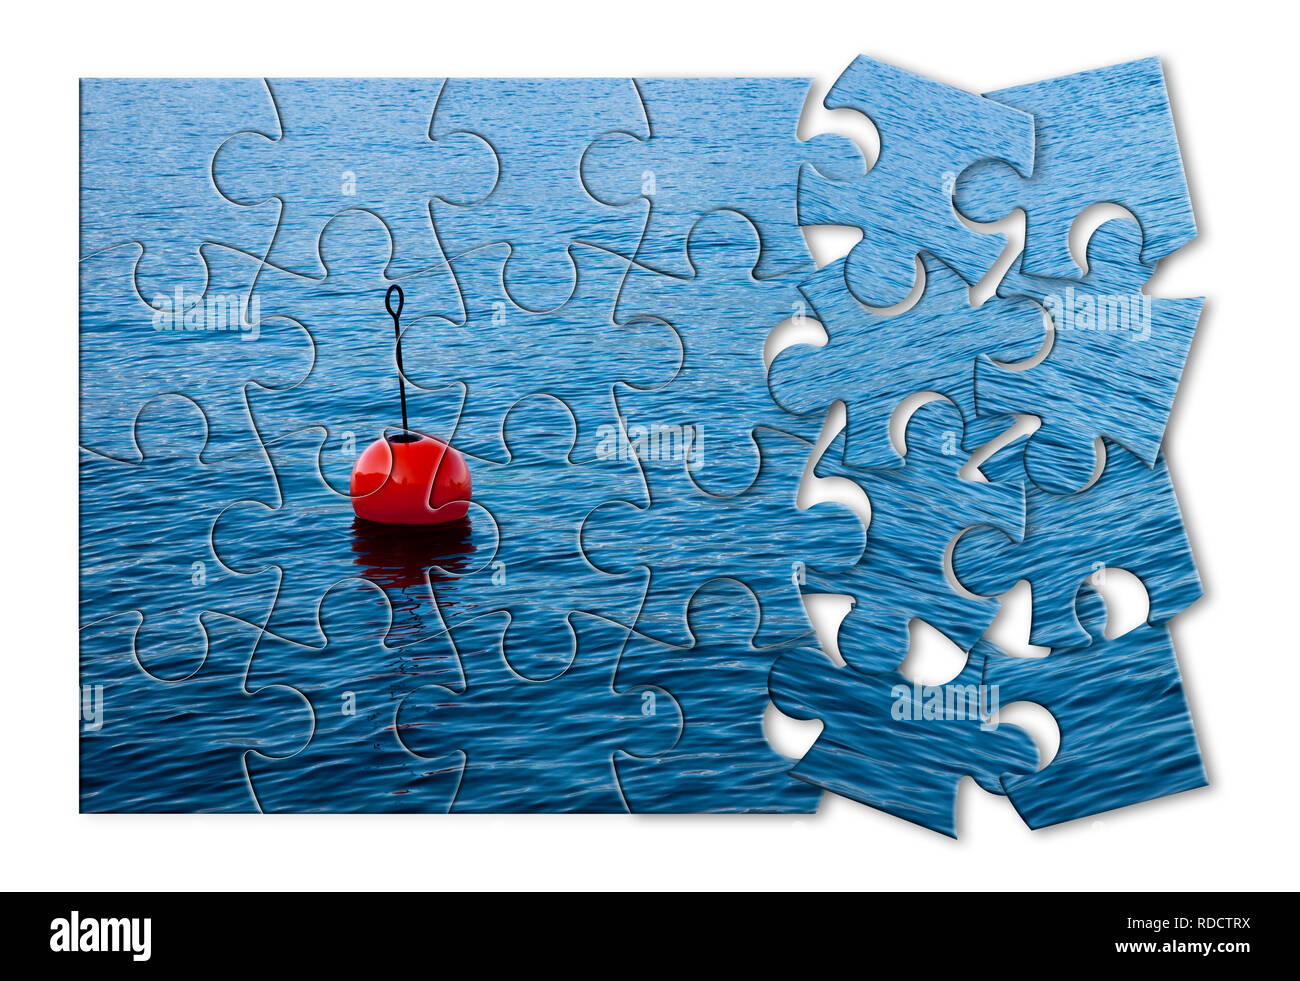 Build your security step by step - Concept image, with red bouy on a calm lake, in jigsaw puzzle shape Stock Photo